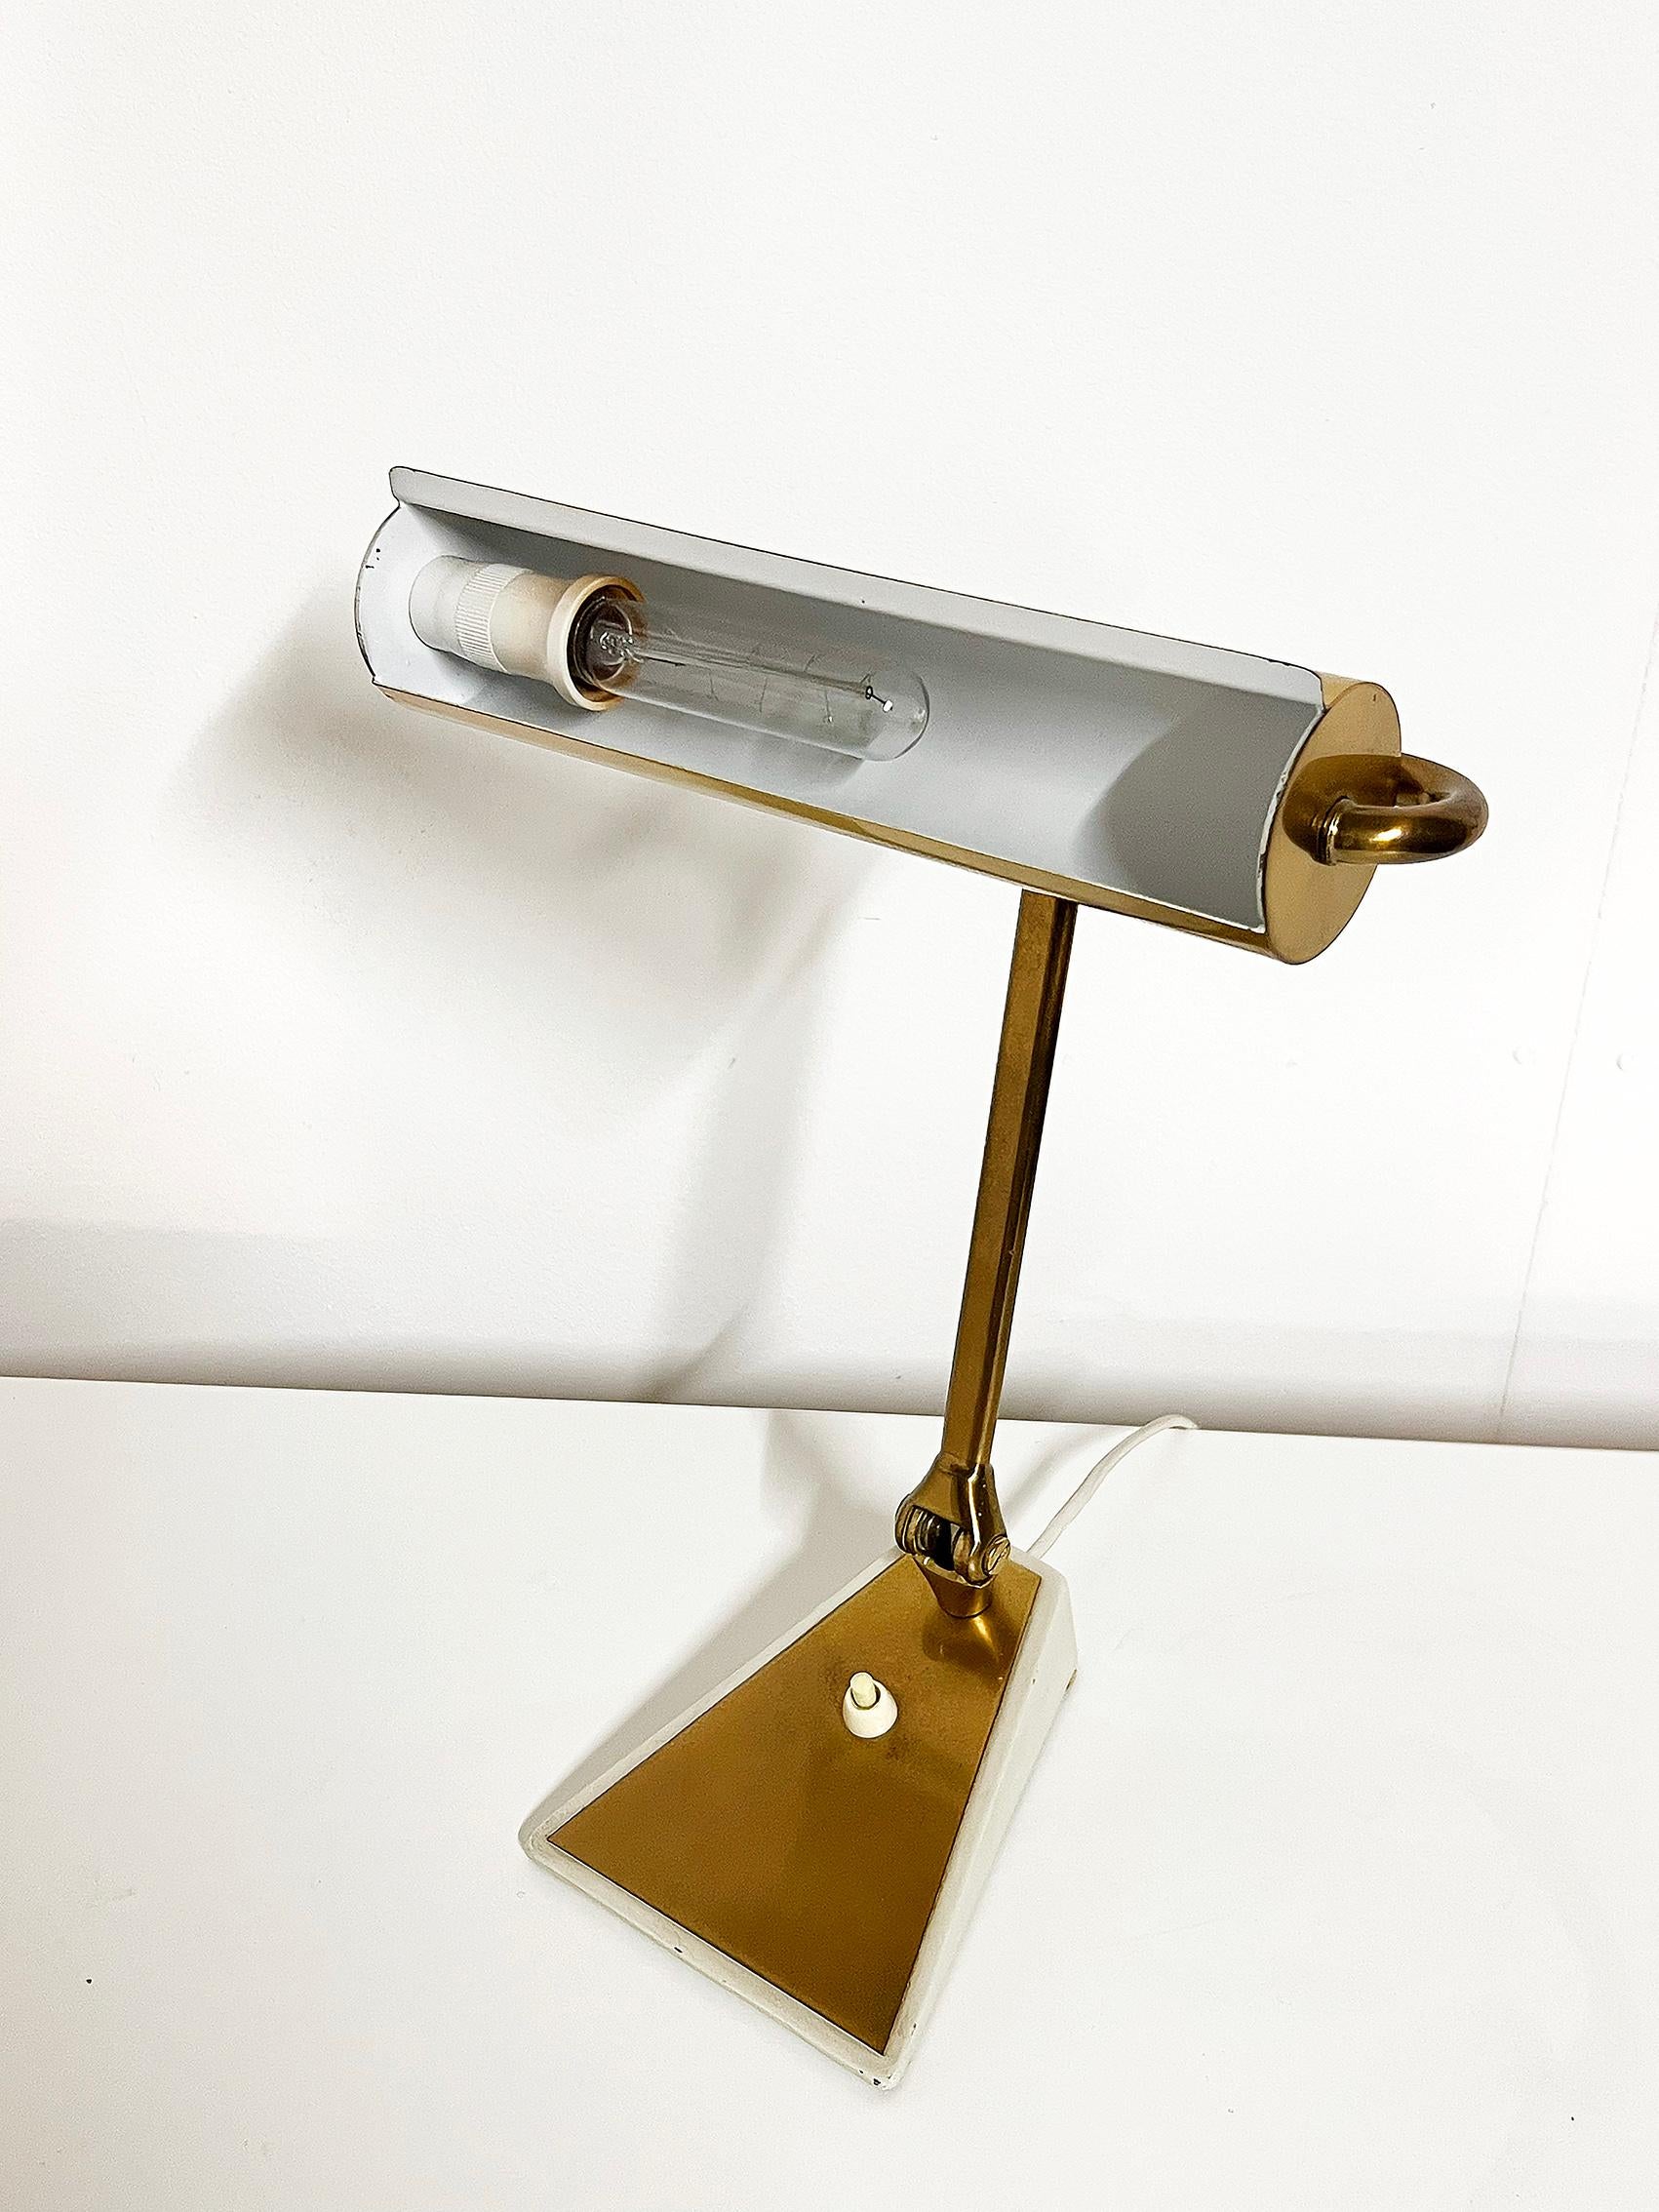 Scandinavian Modern Table Lamp in Brass by Boréns ca 1950-1960's For Sale 3